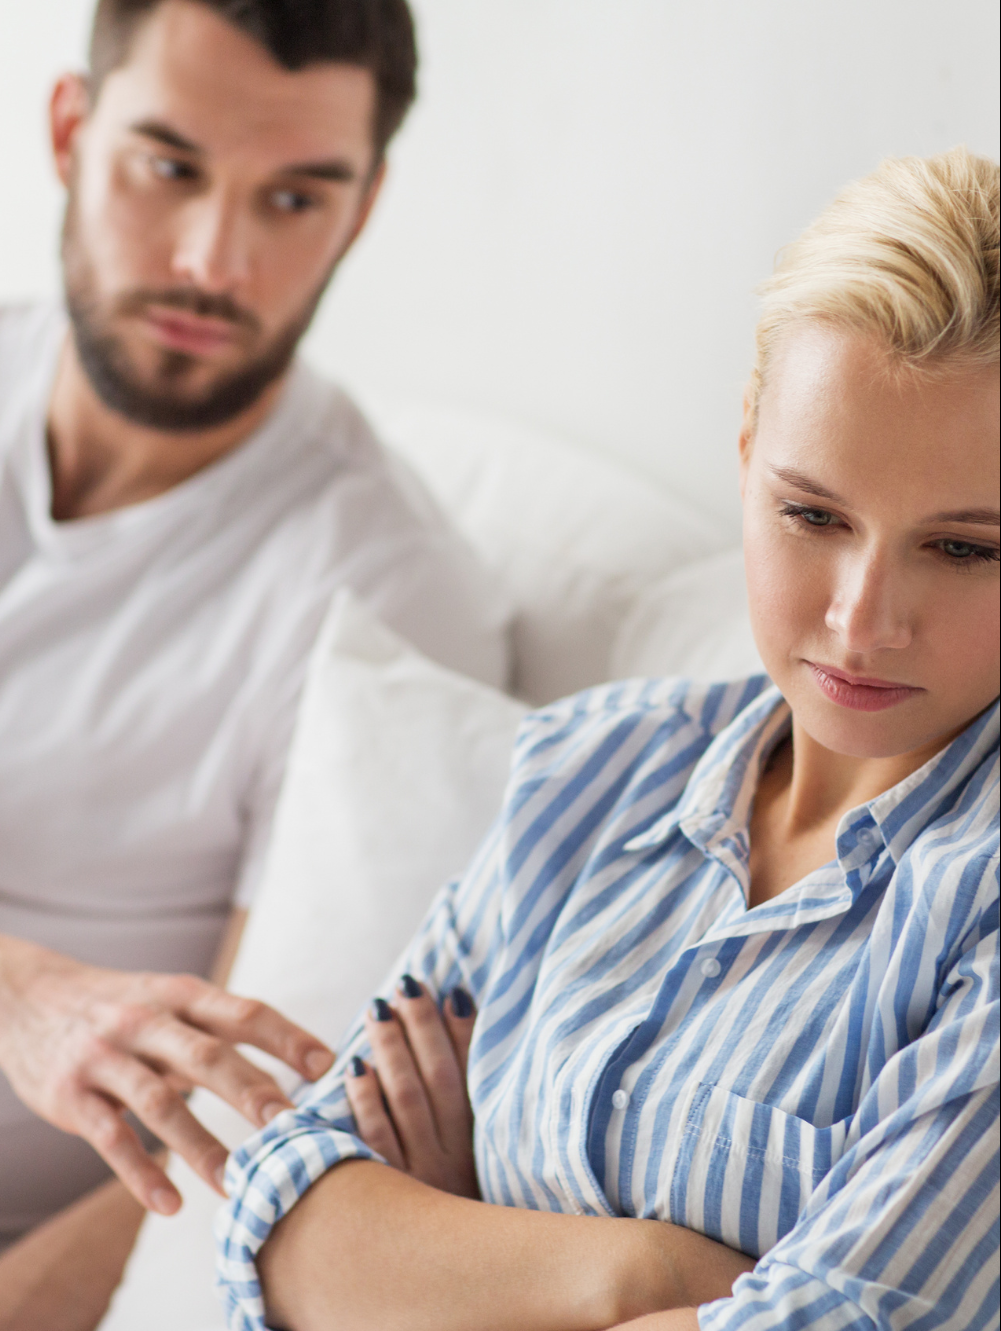 signs a woman is unhappy in her marriage?